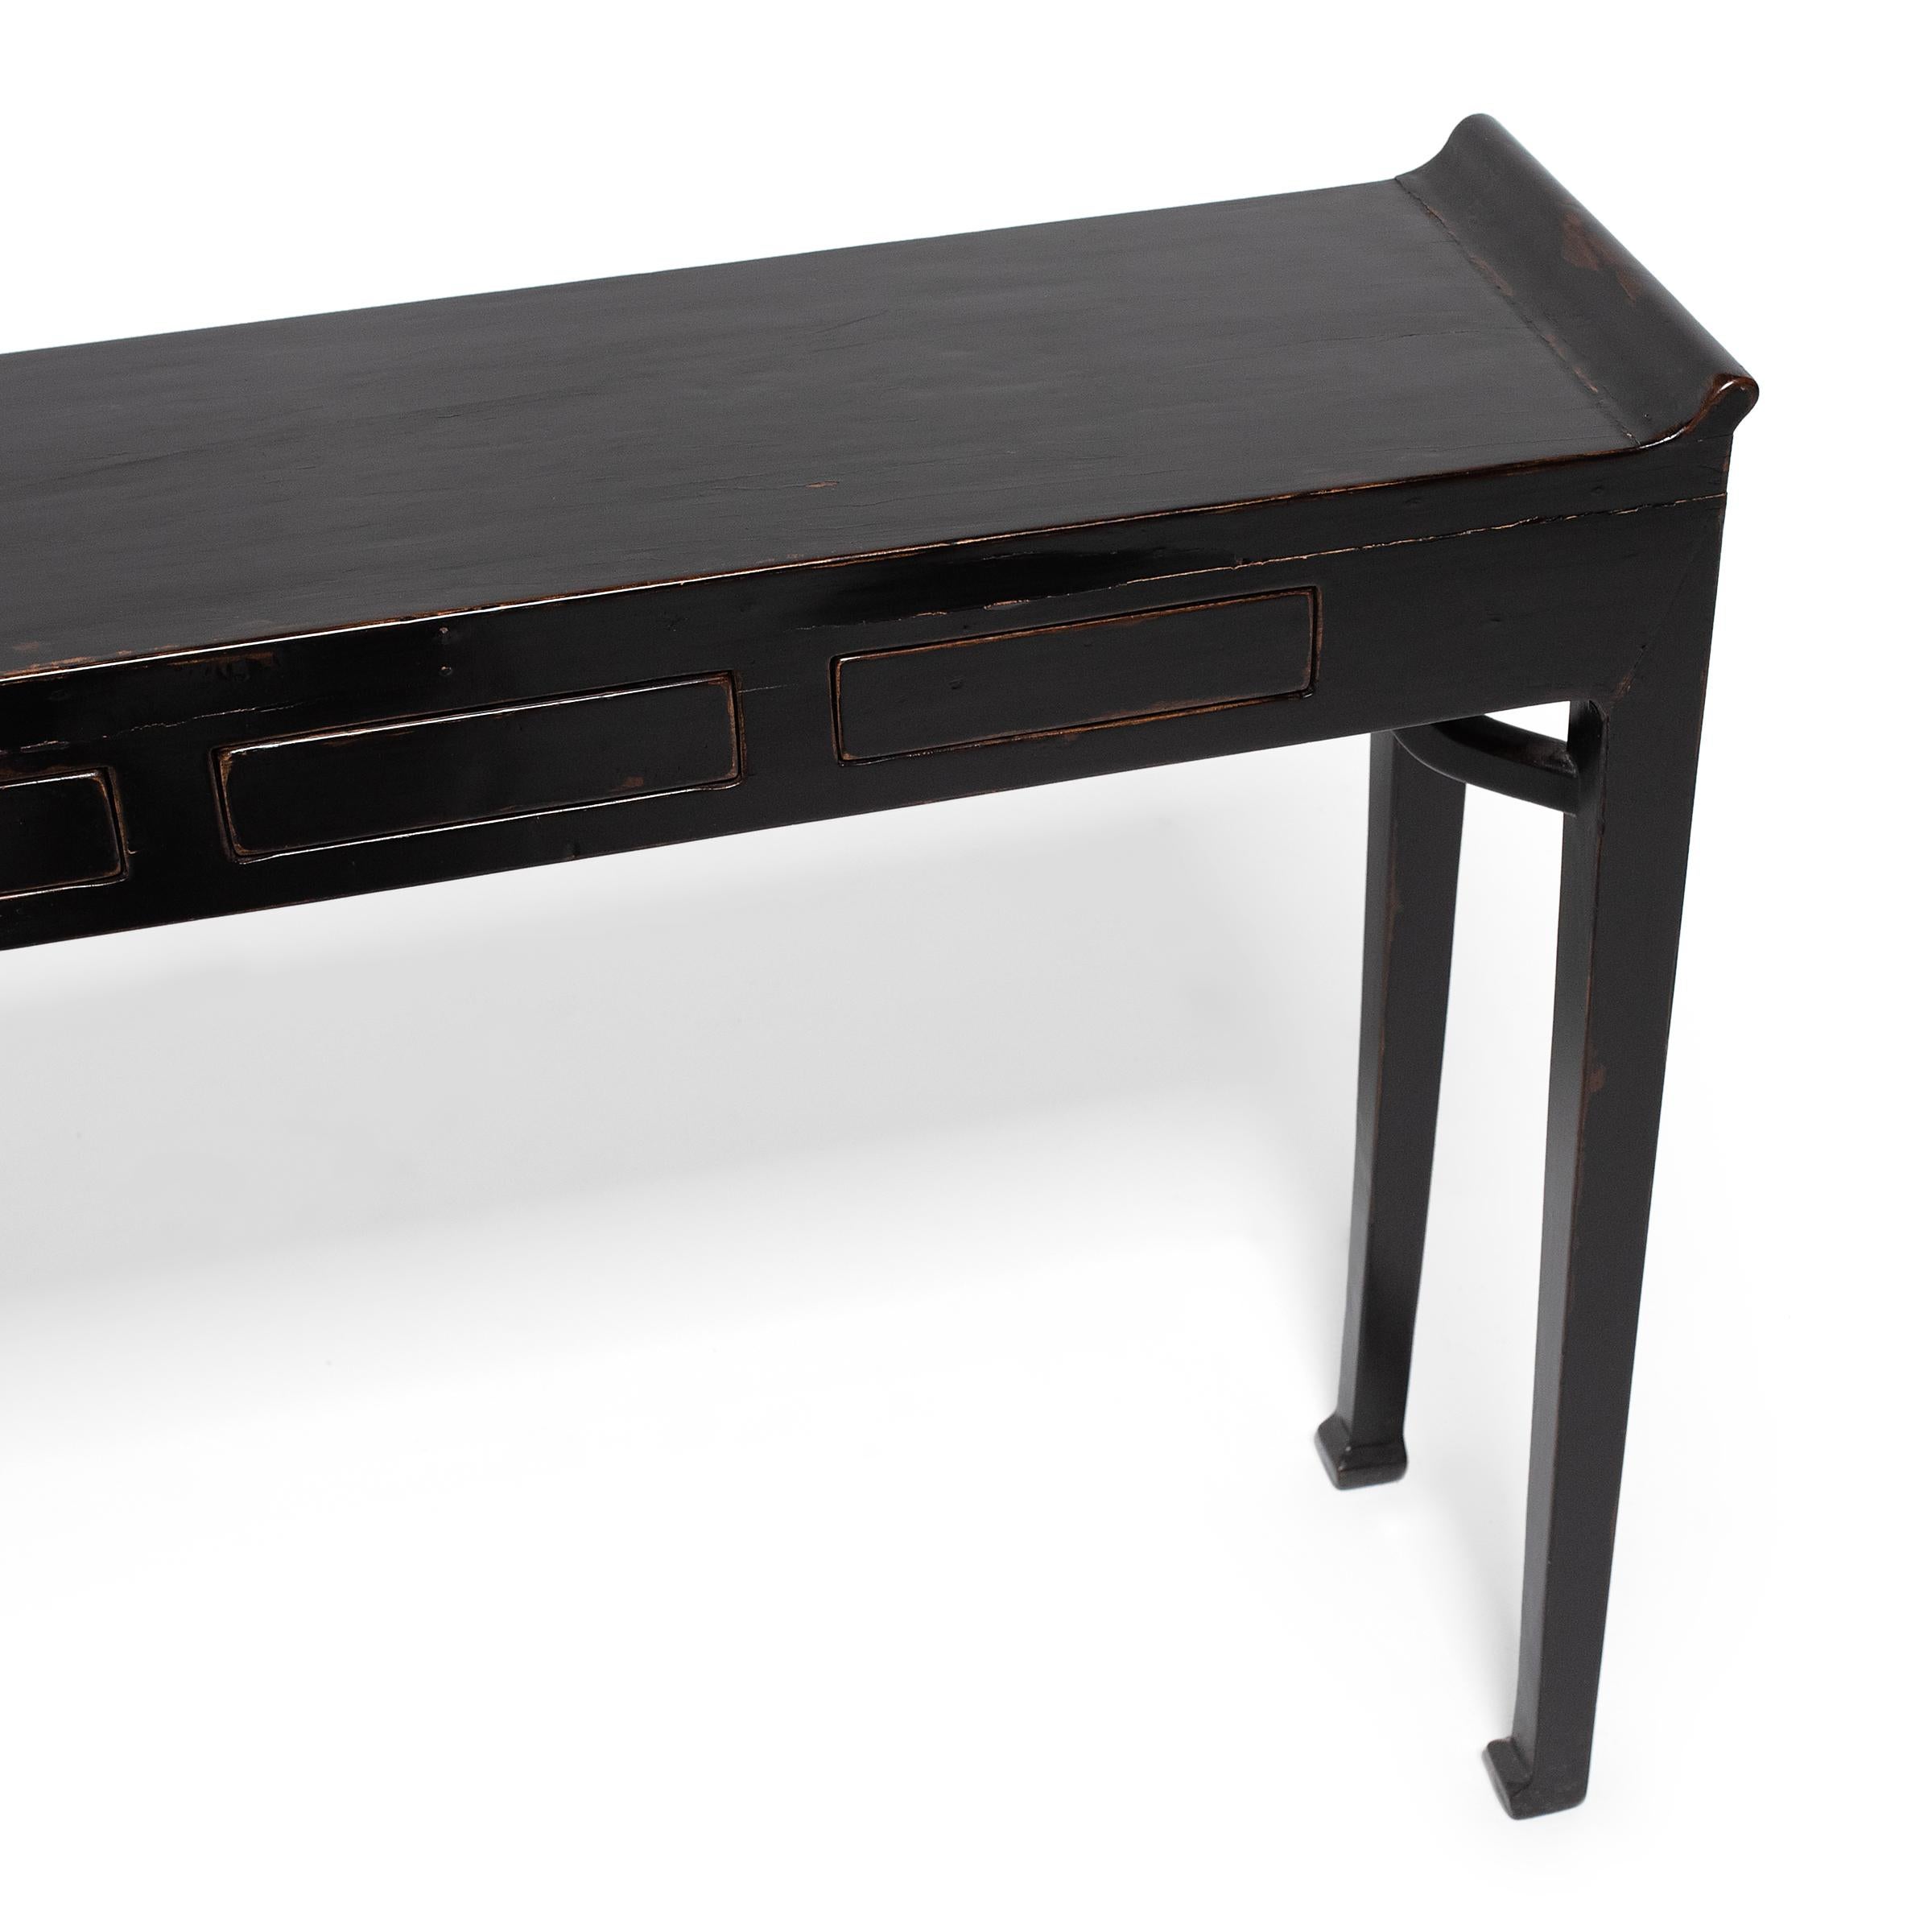 Elm Chinese Black Lacquer Altar Table with Hidden Drawers, c. 1900